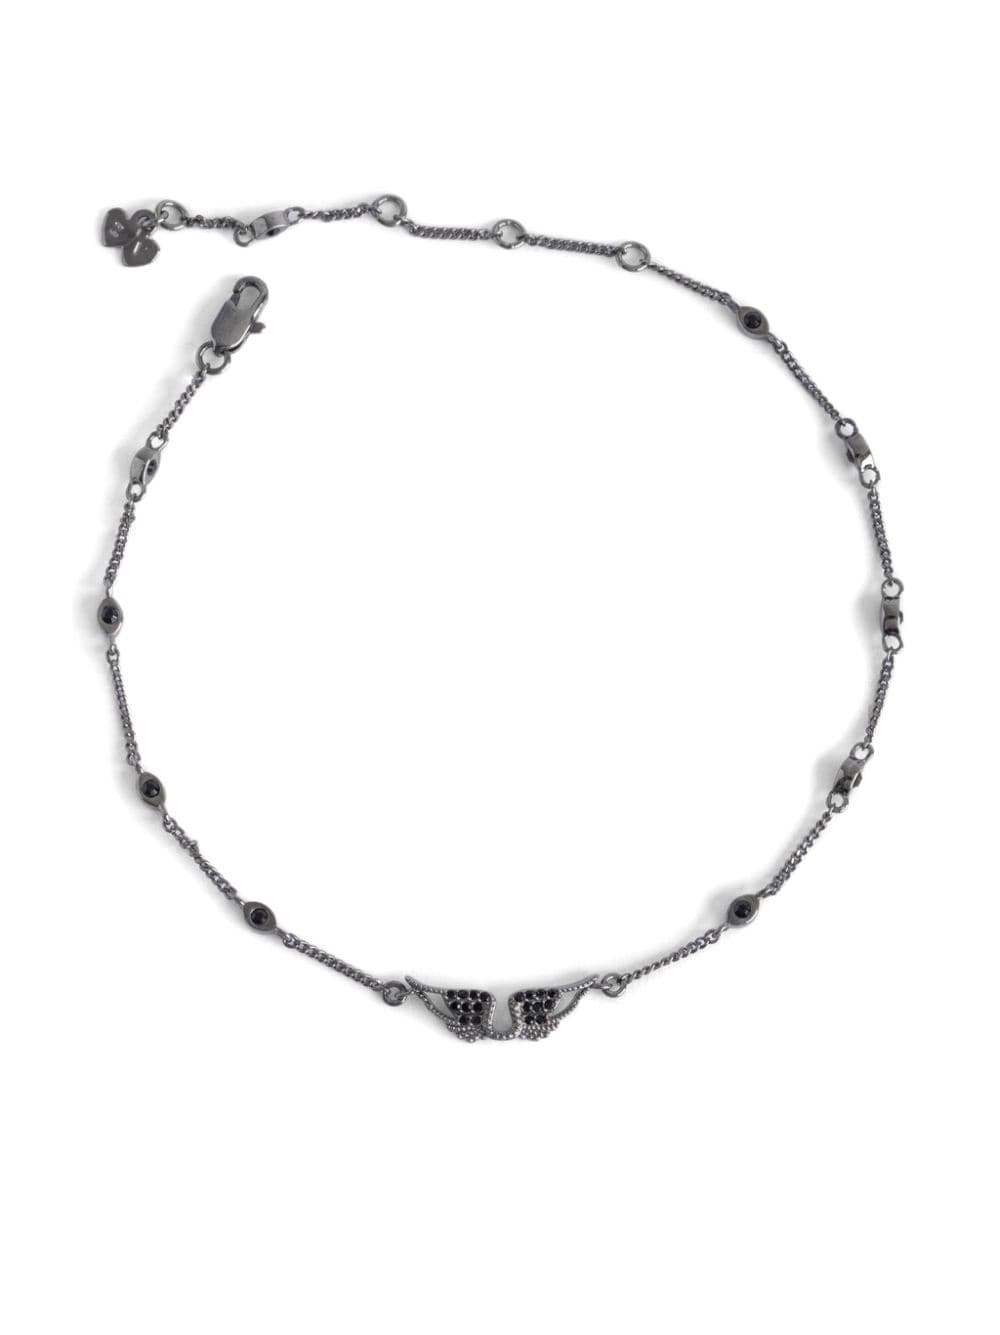 Rock chain anklet - 1